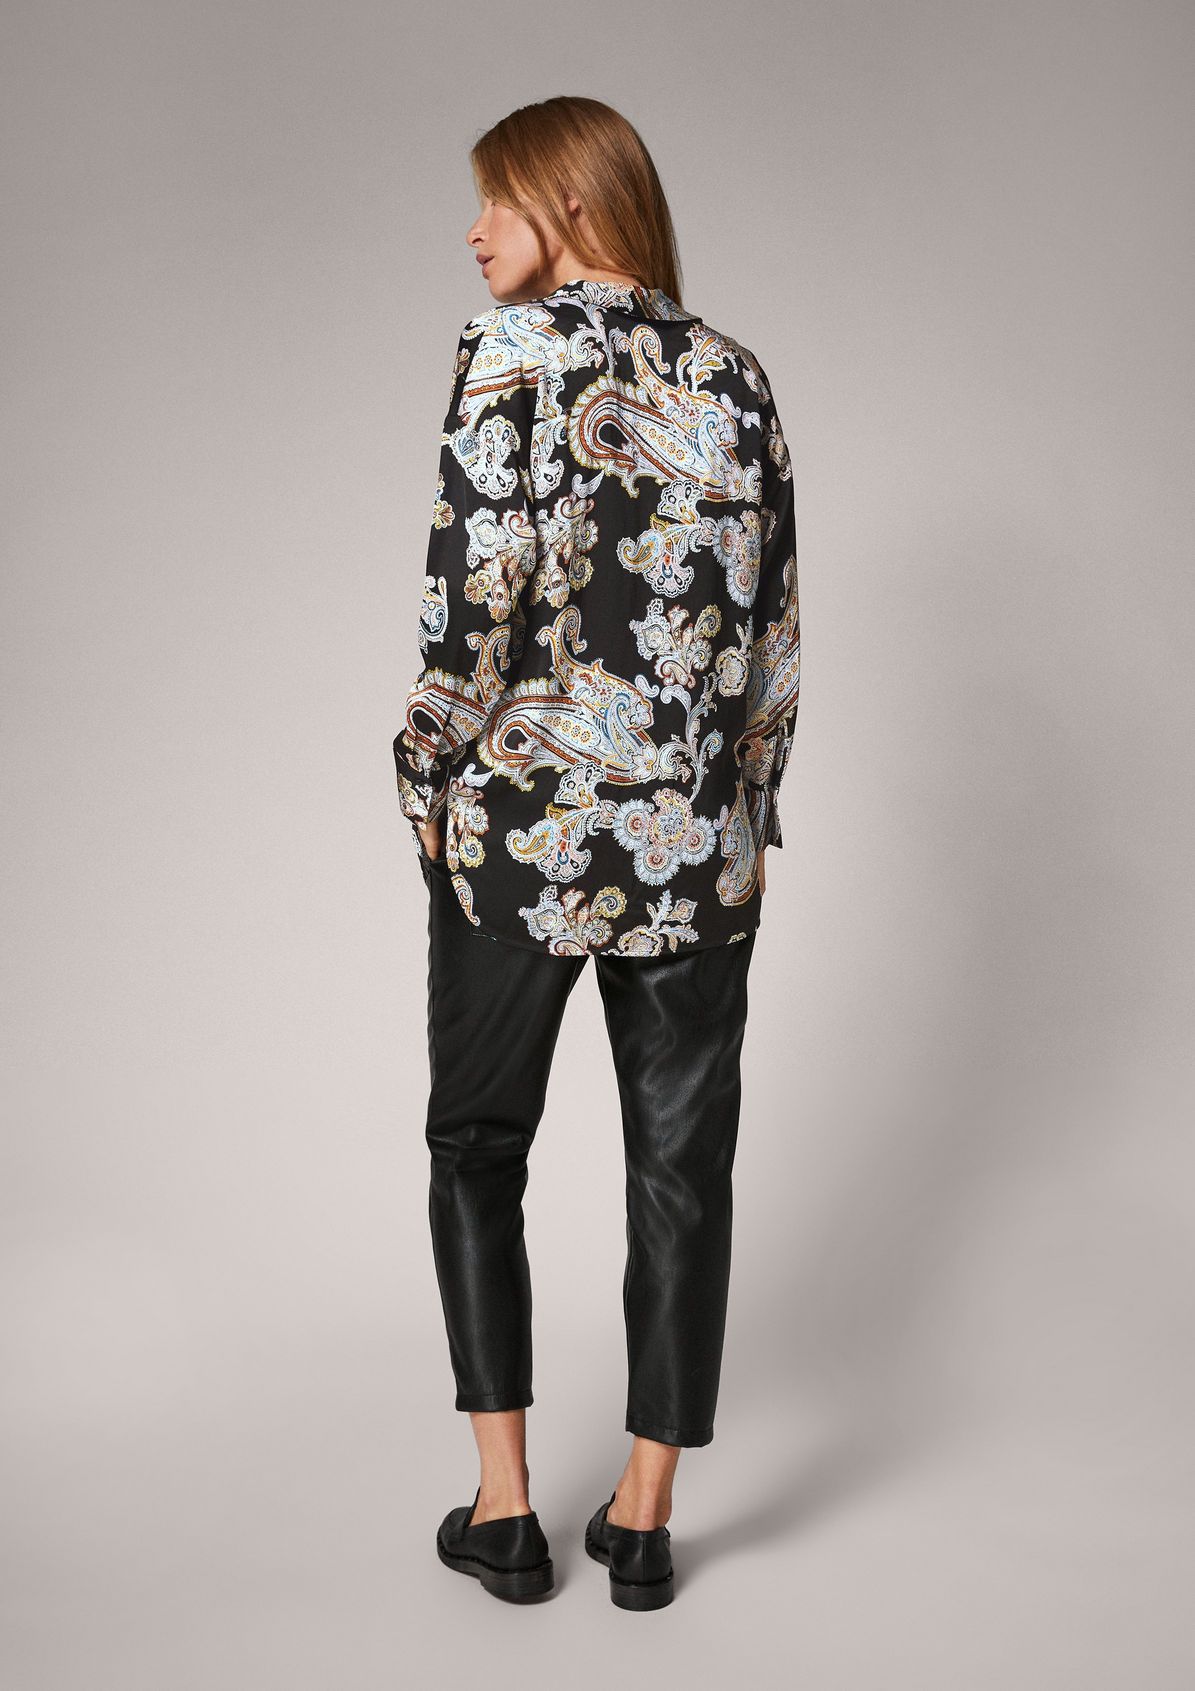 Paisley blouse made of viscose from comma